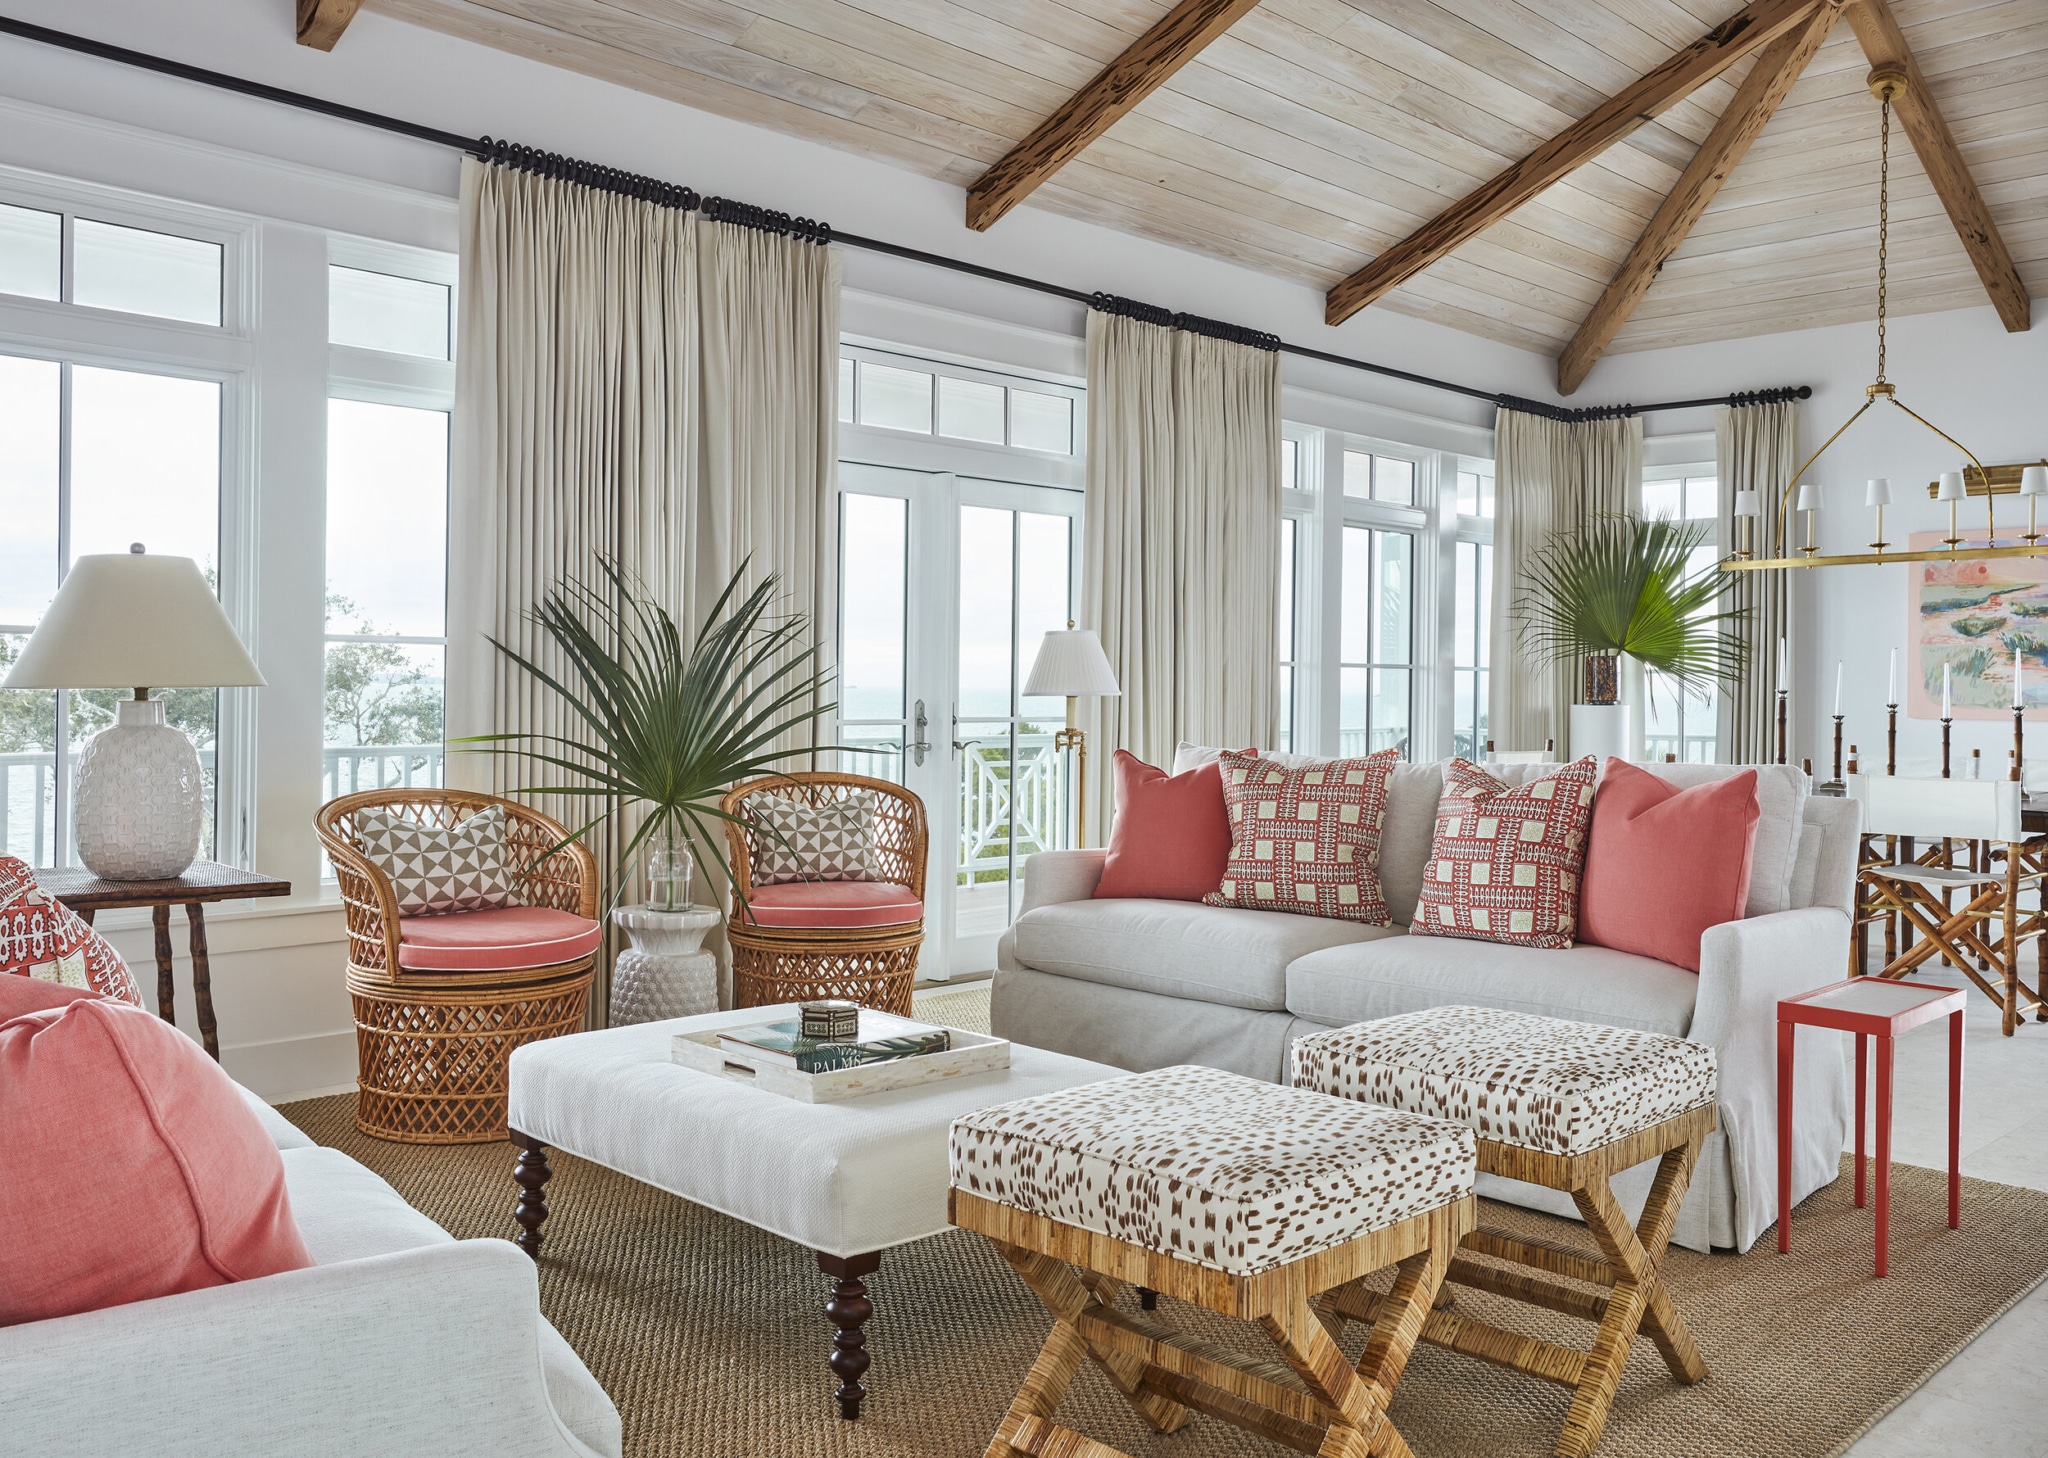 Kara Miller Interiors | Brantley Photography living room in coral and white. Love all of the textures and the wood beams. | living room design | living room ideas | living room decor | palm leaves | awash in color